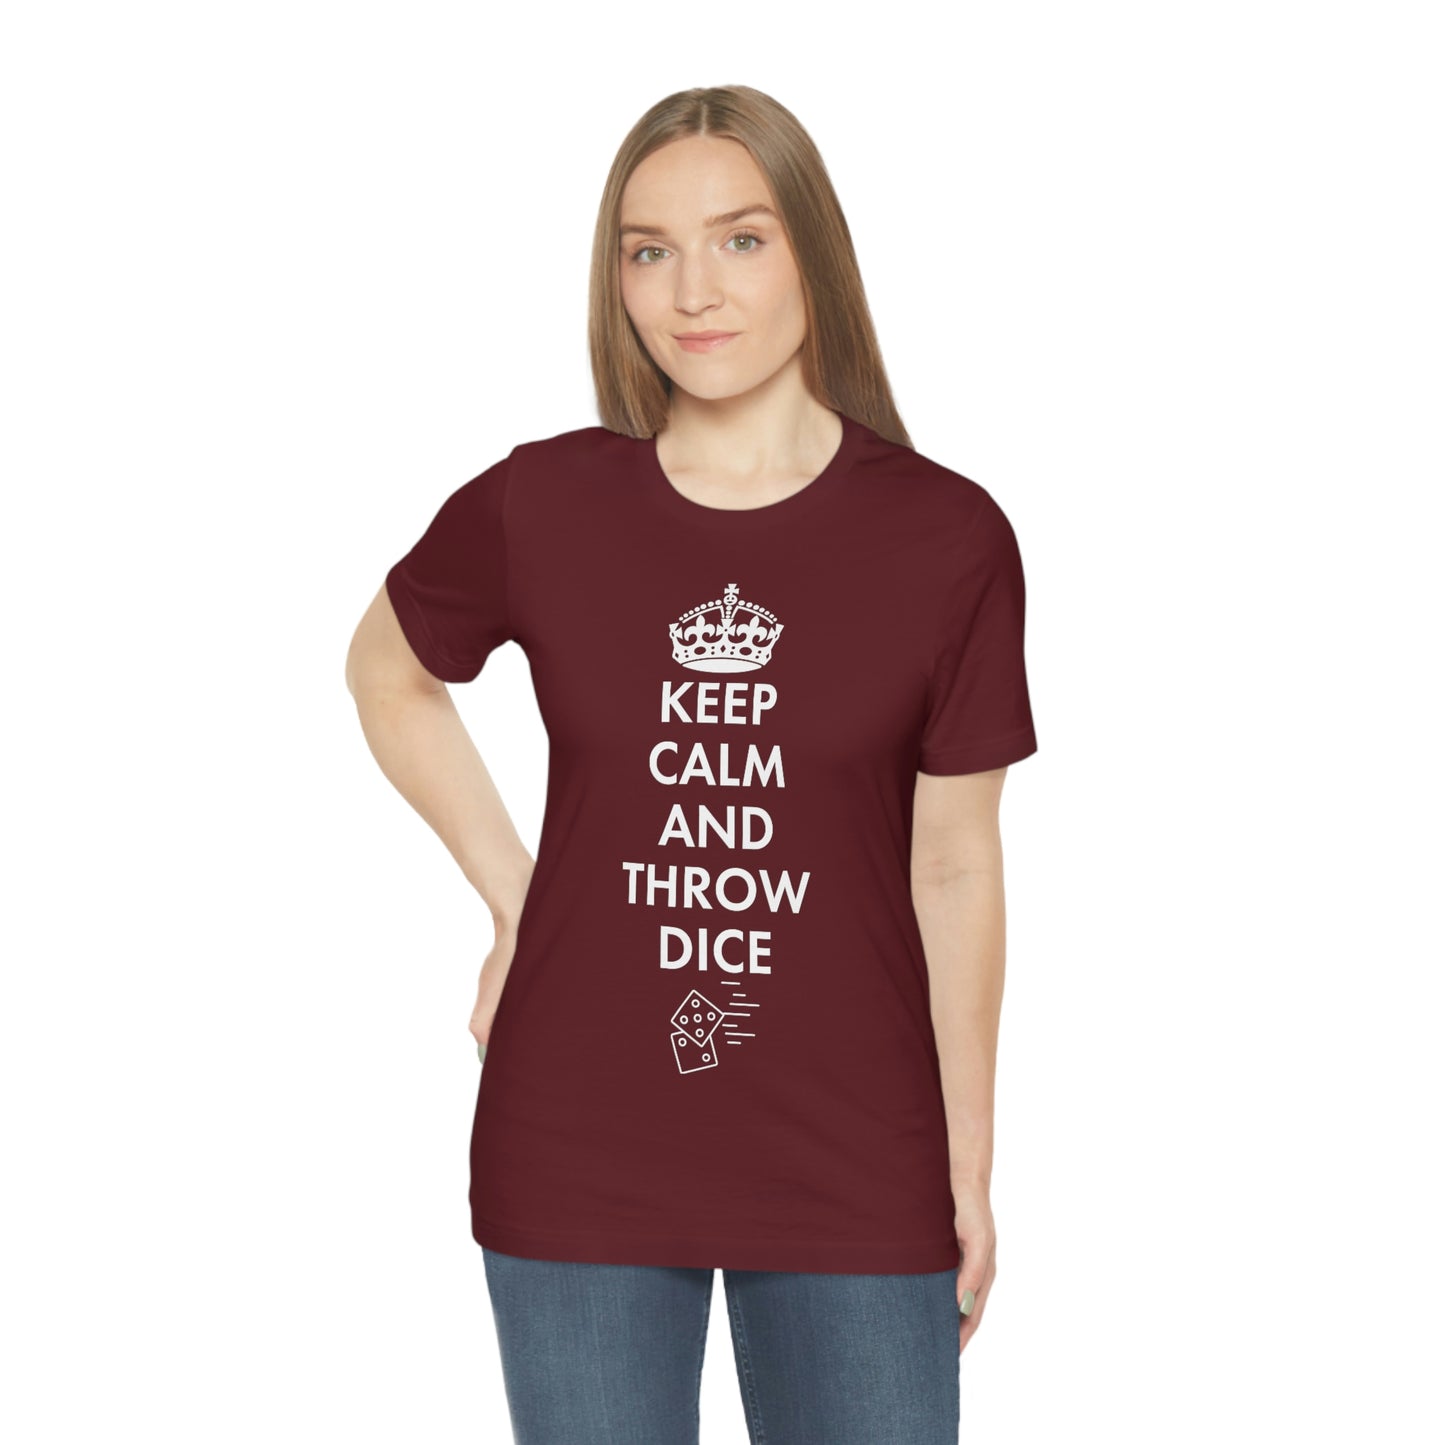 Keep Calm and Throw Dice crew neck (Unisex fit)